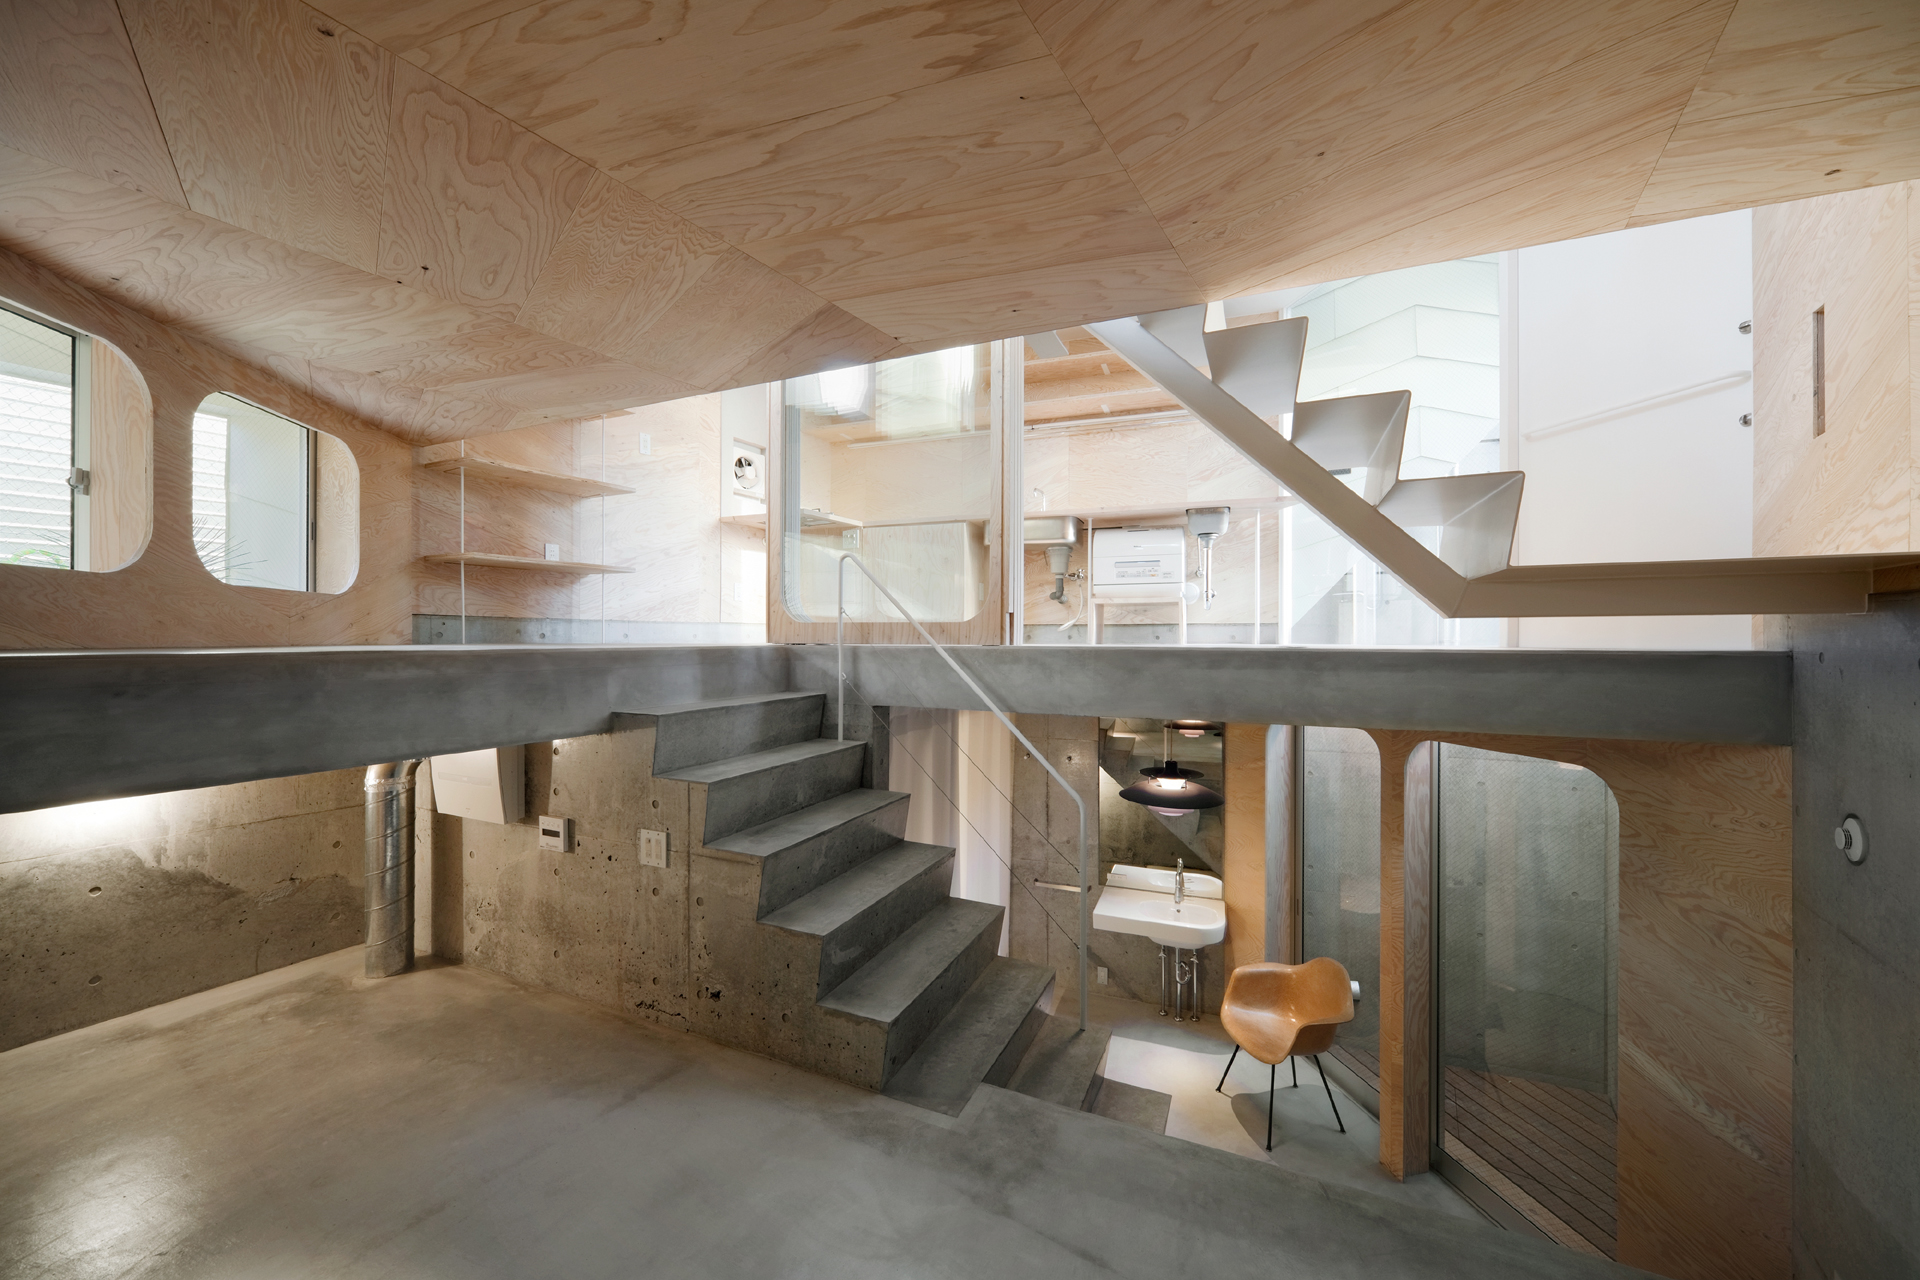 6 Ways to Get the Most Out of Small Spaces - Architizer Journal